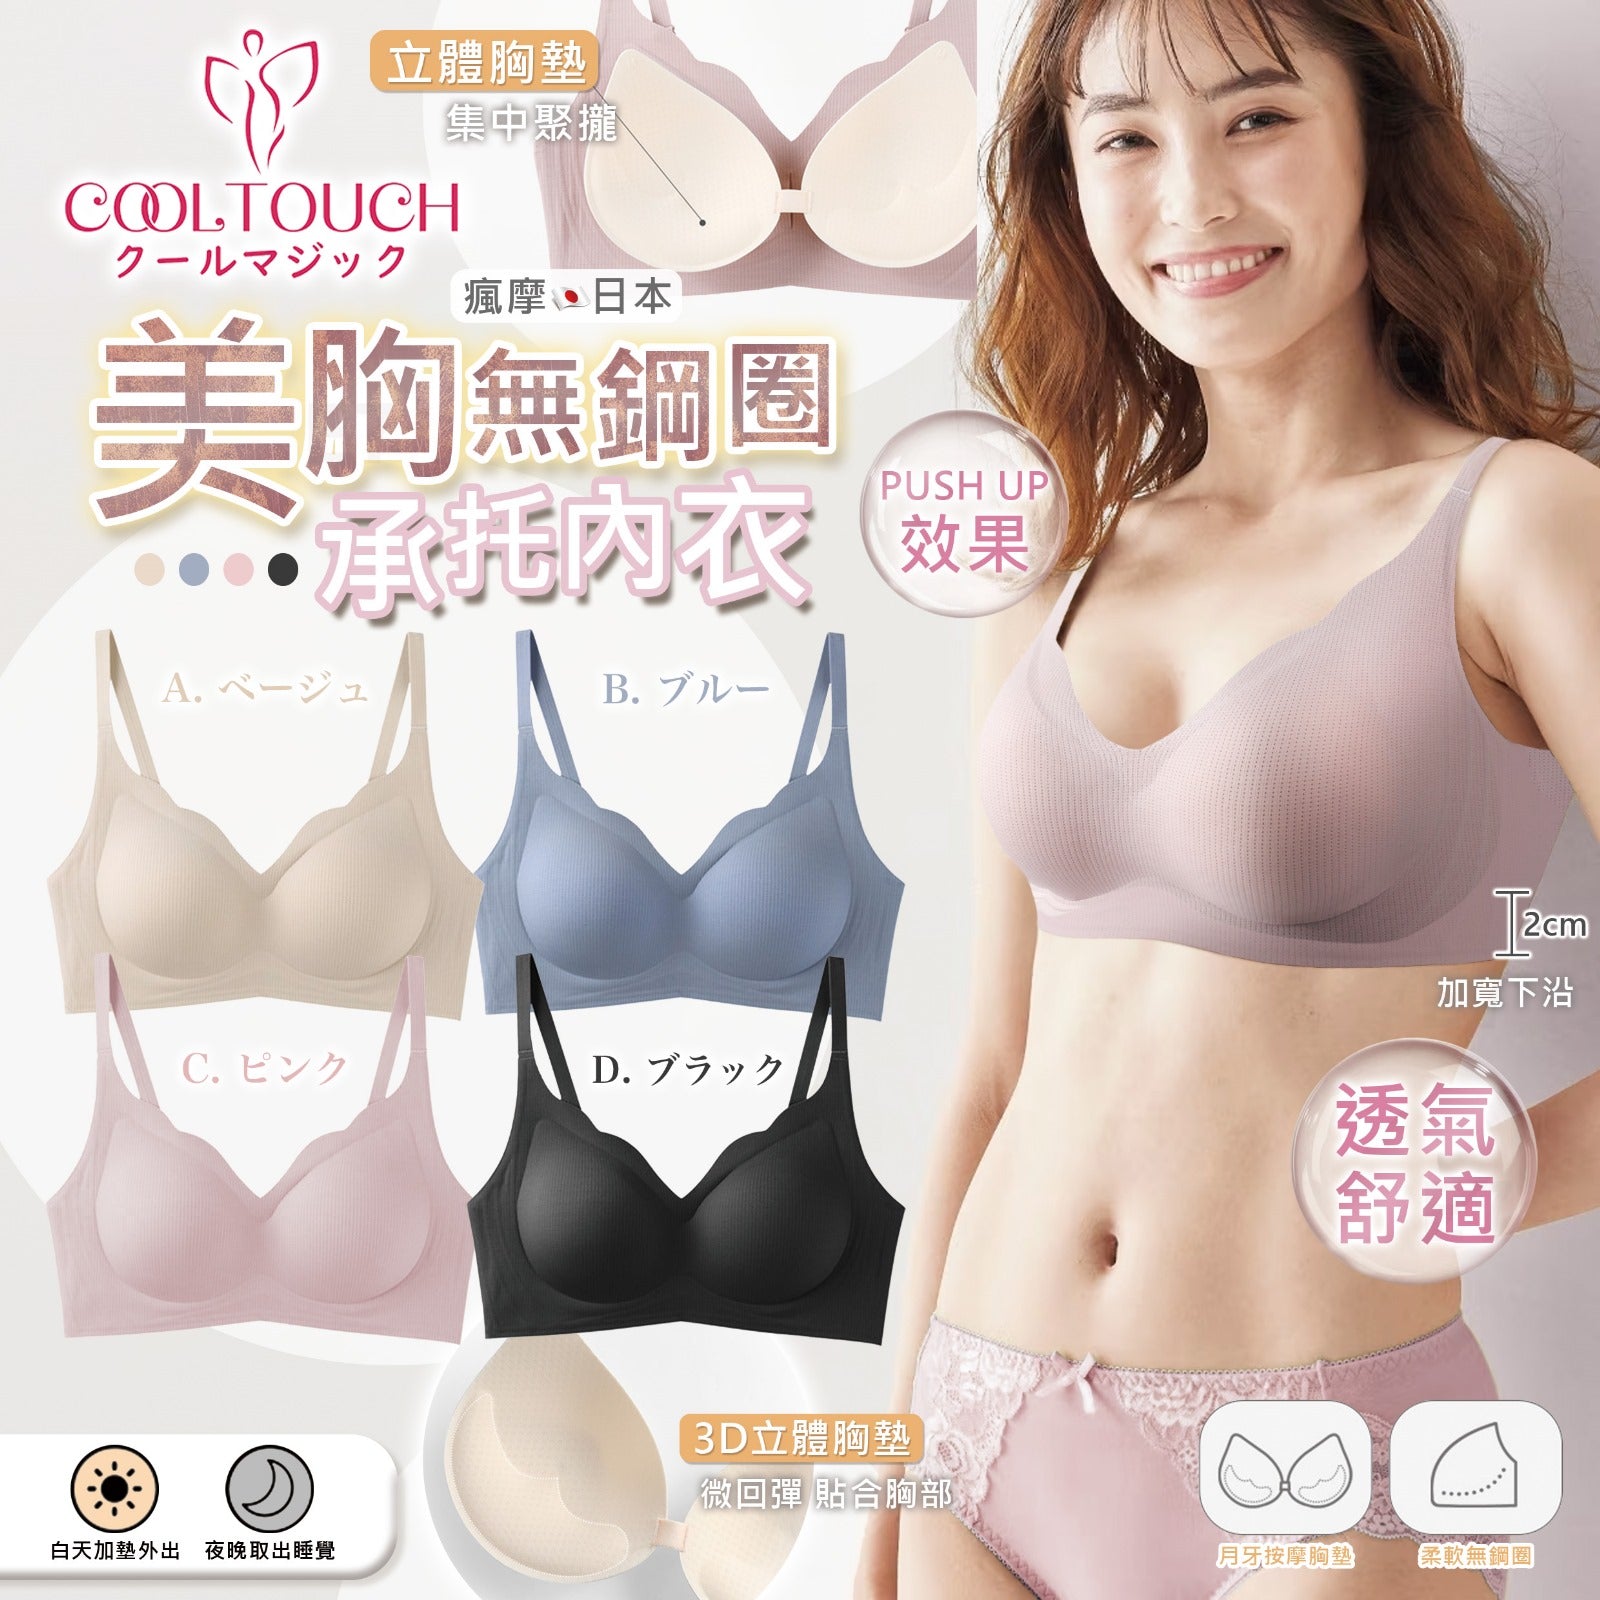 Ended at 2359 on 6/11✨Japanese Cool touch push up bra for breast